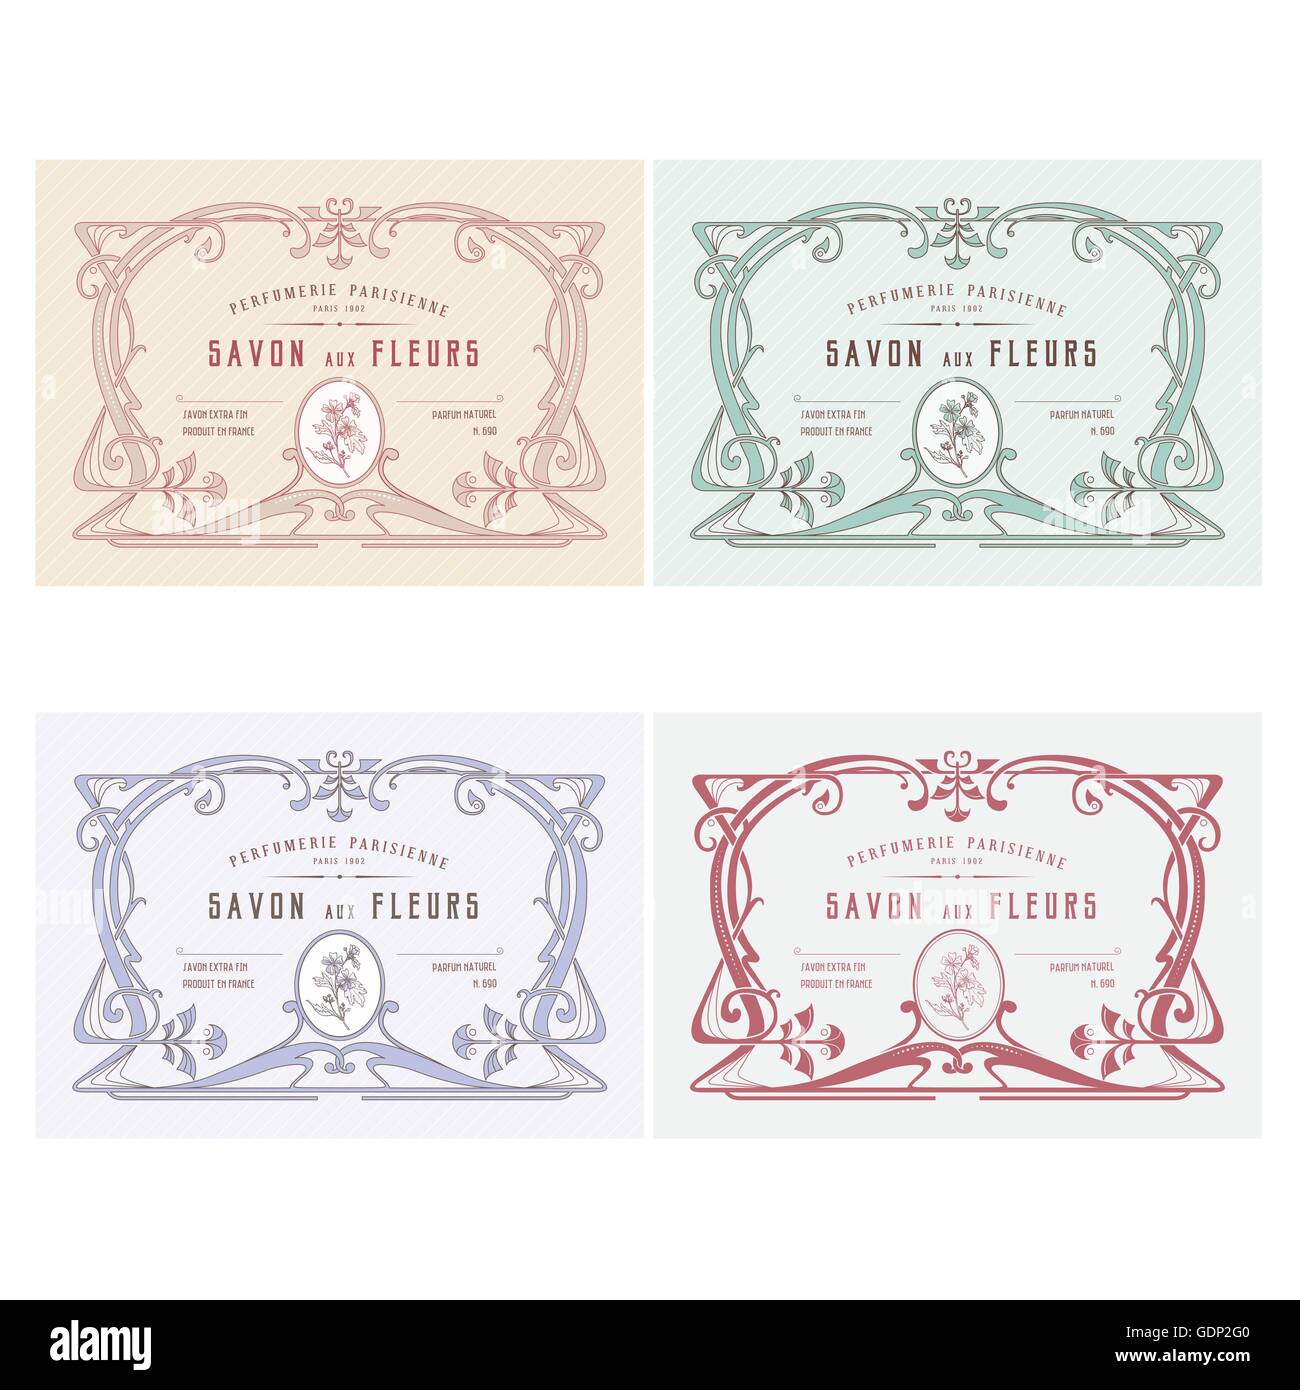 Vintage soap label with decorative frame and text Stock Vector